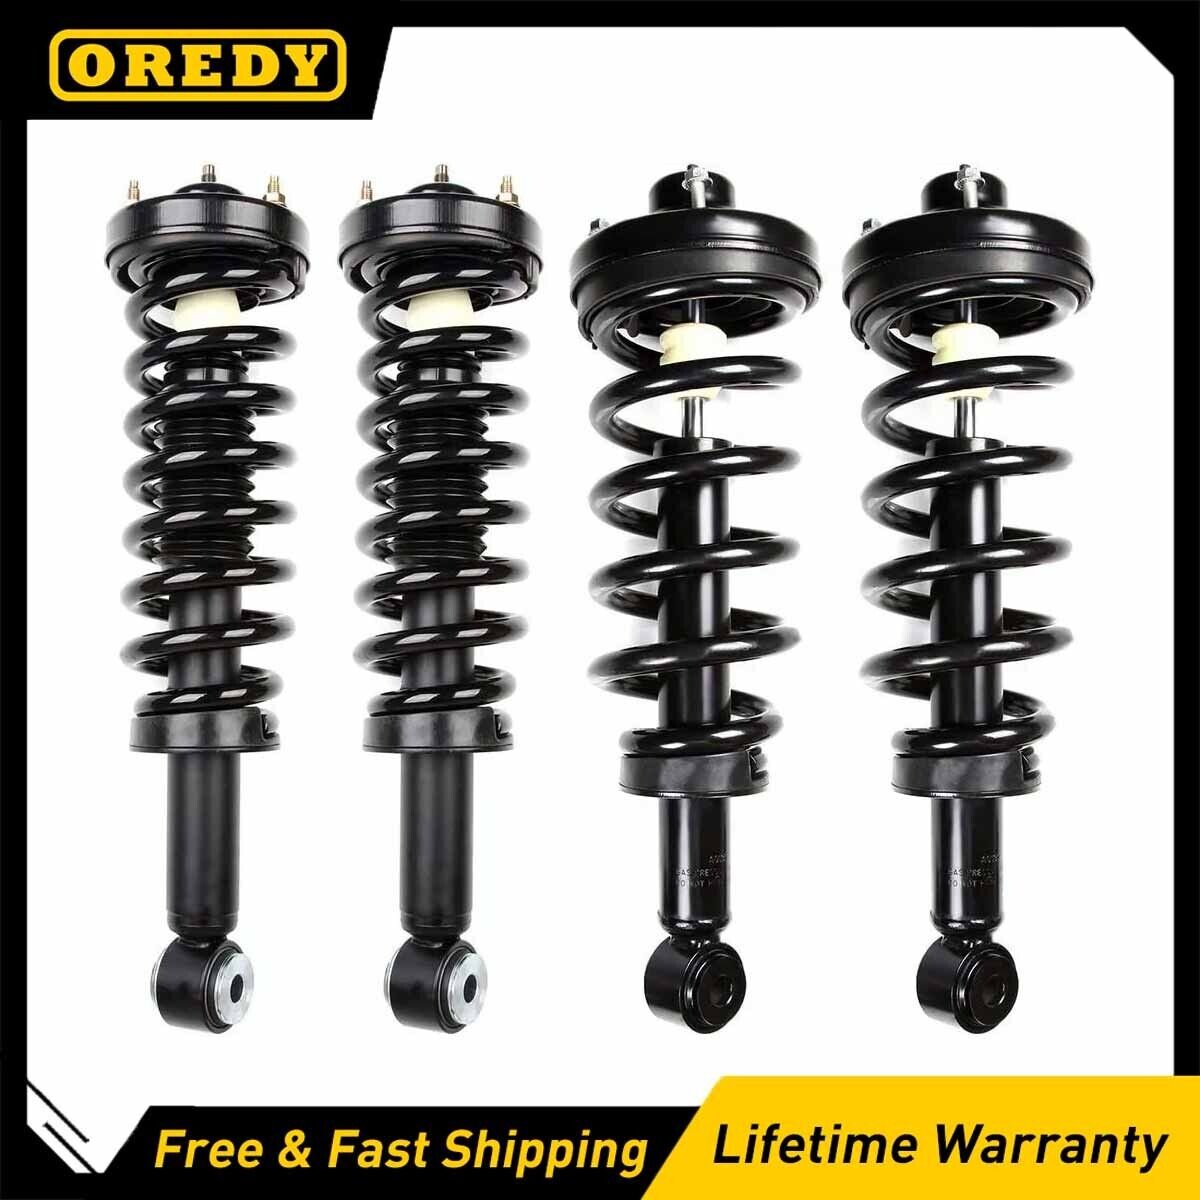 2x Front + 2x Rear Struts for Ford Expedition Lincoln Navigator 2007 - 2012 2013